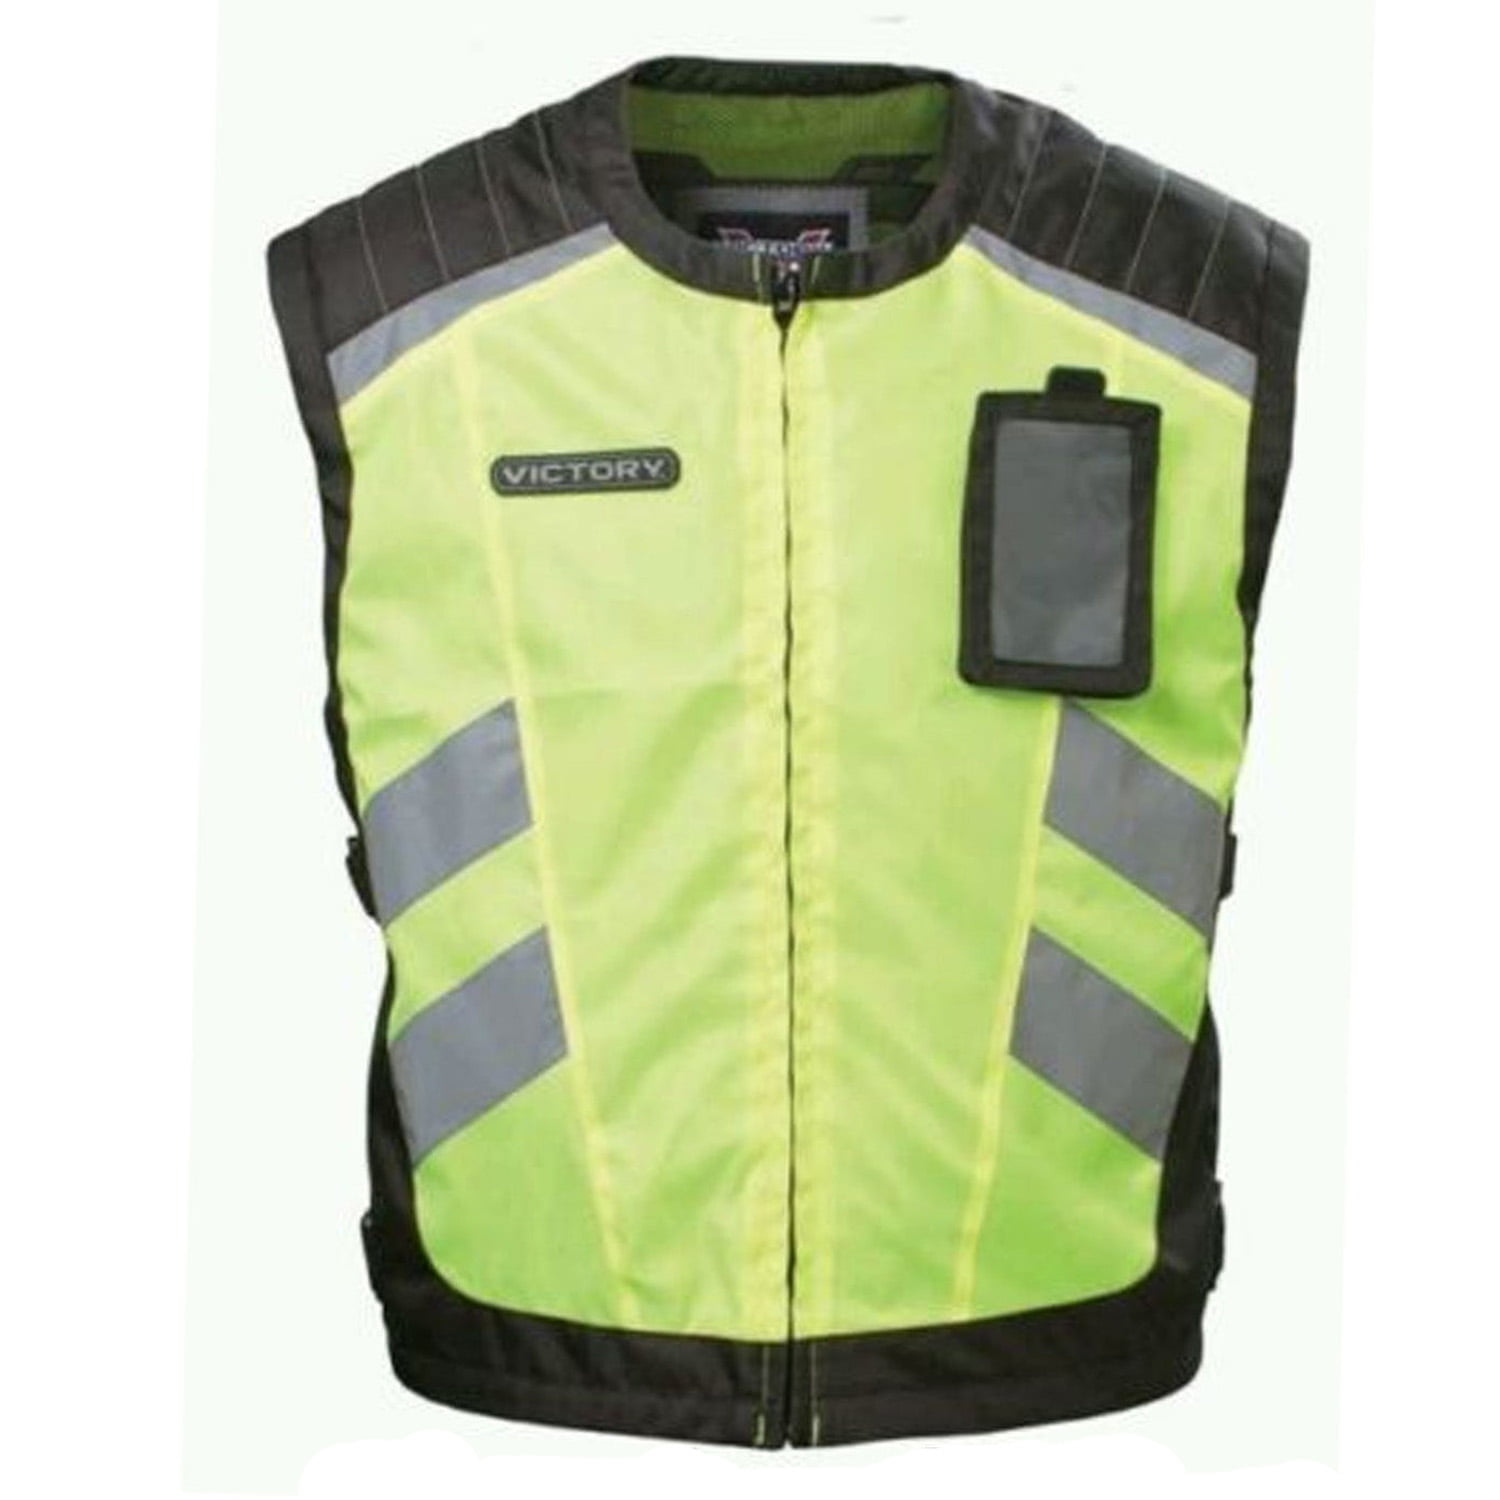 Motorcycle reflective vest military investing in stores fallout 4